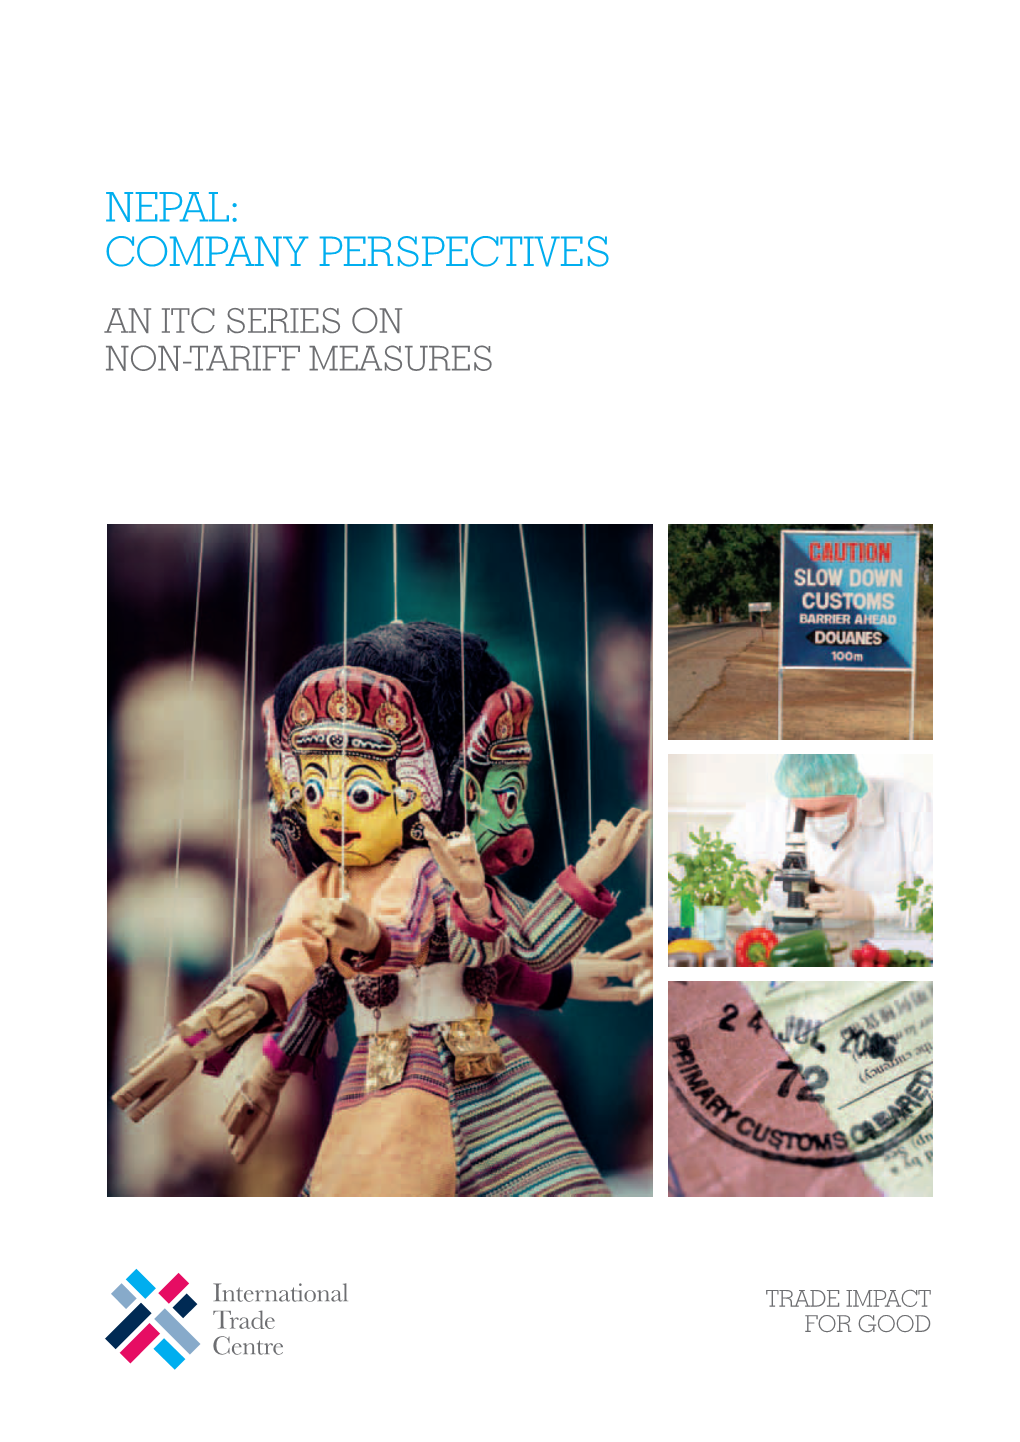 Nepal: Company Perspectives – an ITC Series on Non-Tariff Measures